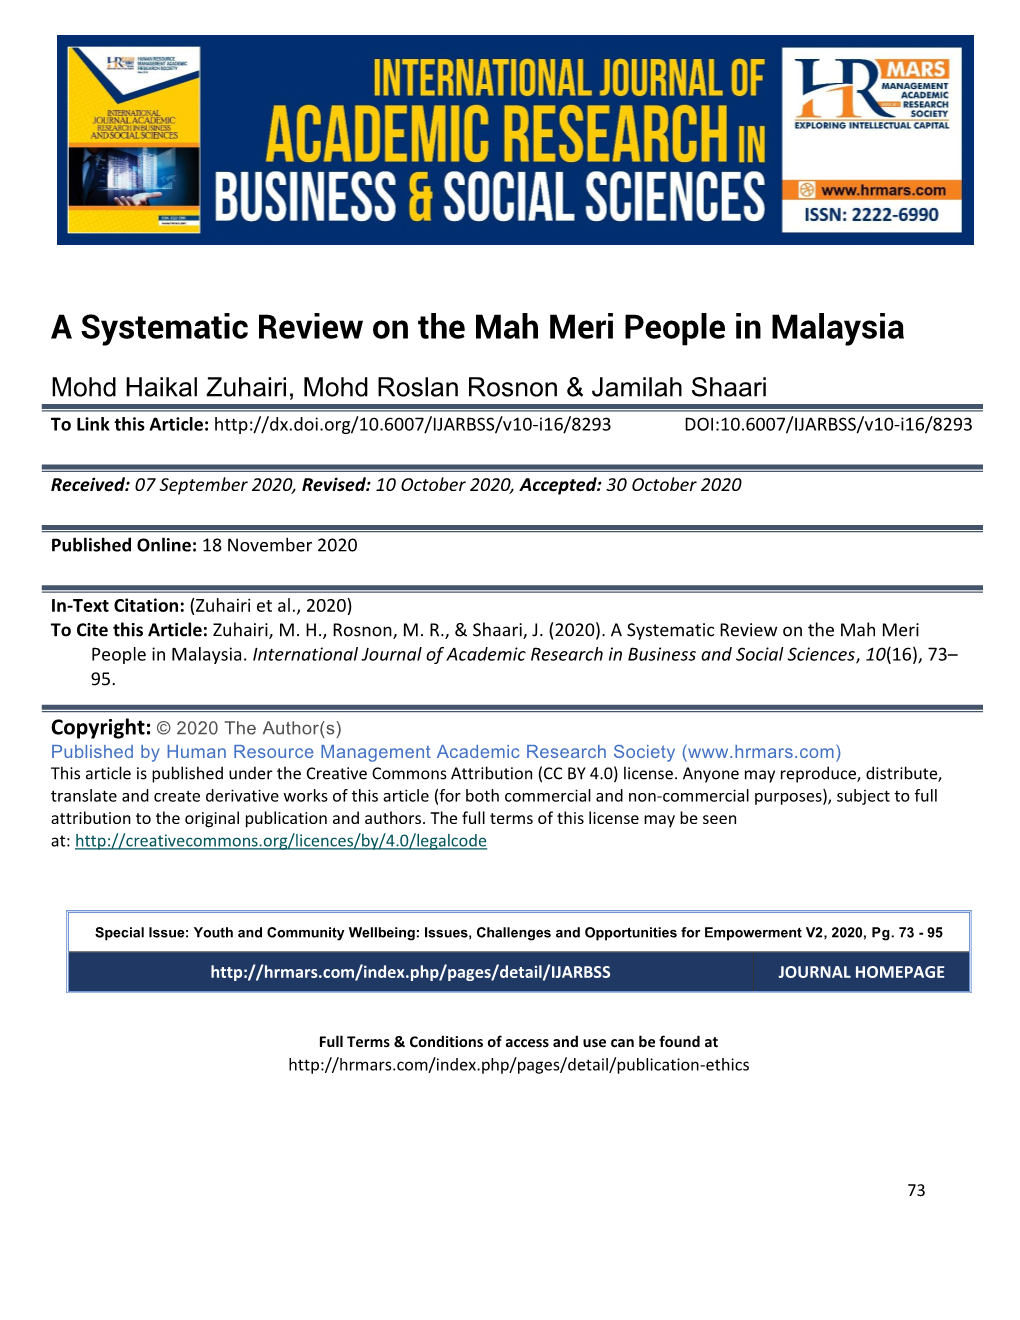 A Systematic Review on the Mah Meri People in Malaysia